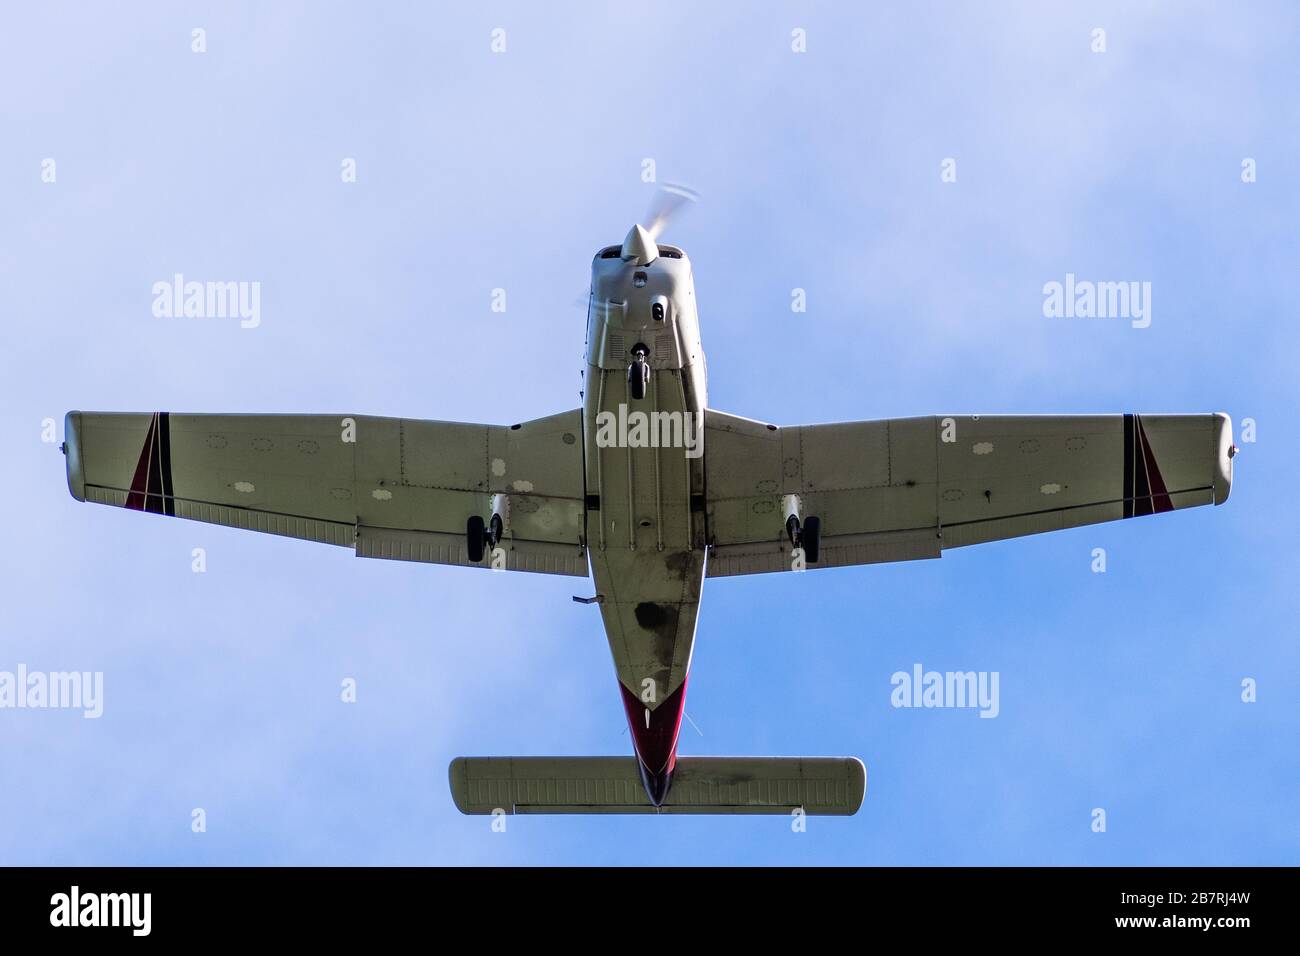 Undercarriage view of flying private airplane Stock Photo